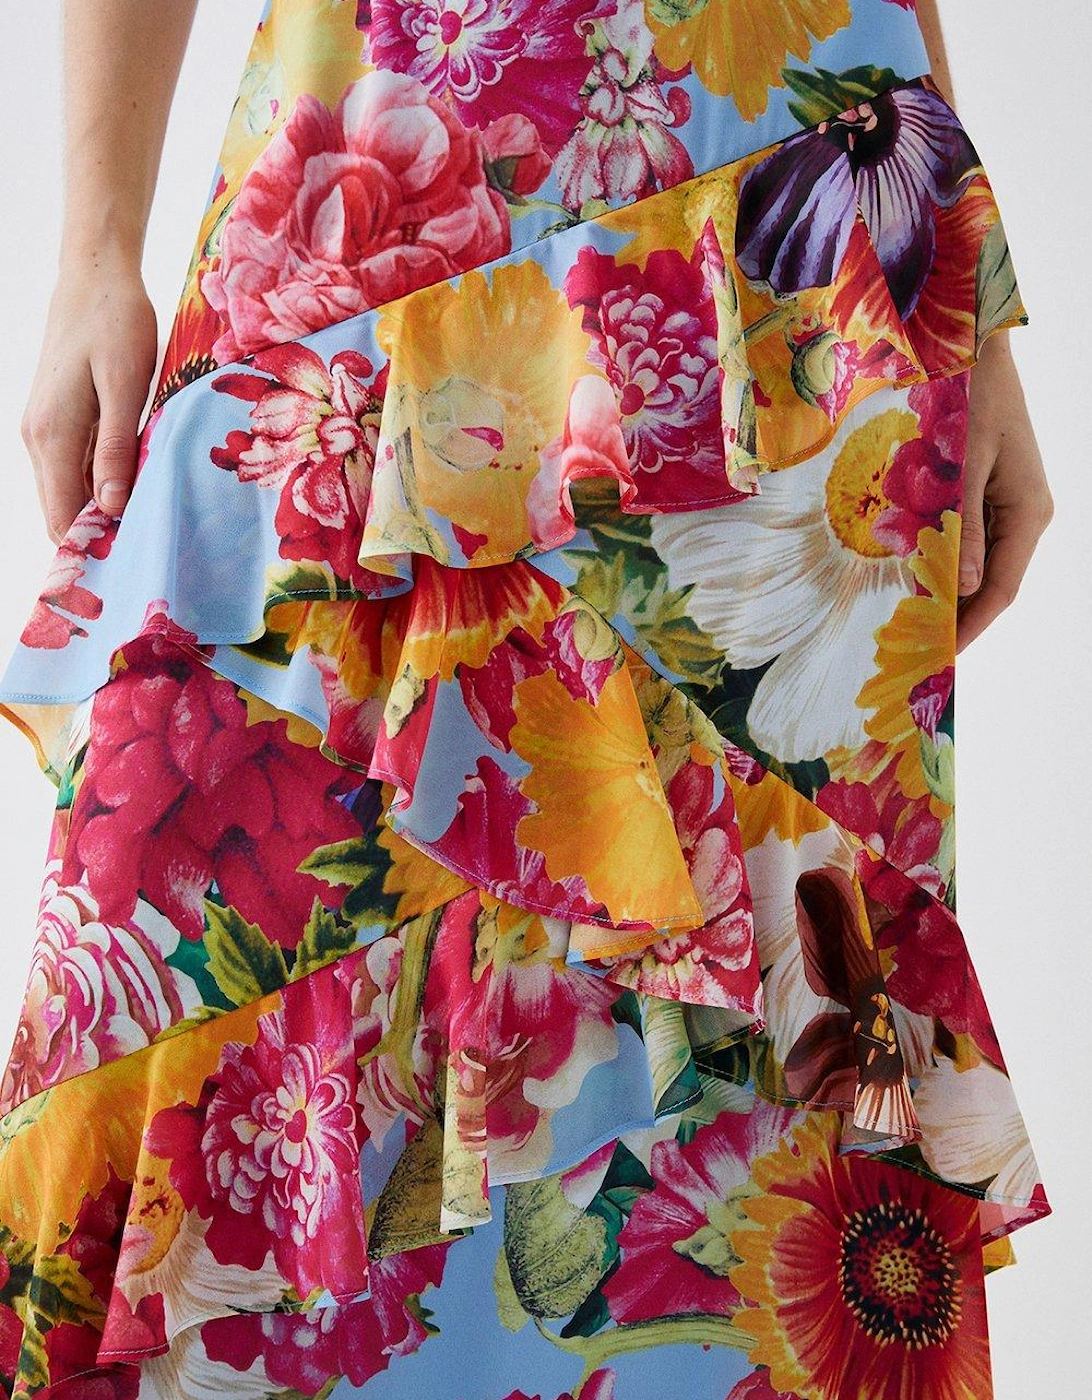 Floral Cut Out Back Ruffle Maxi Dress